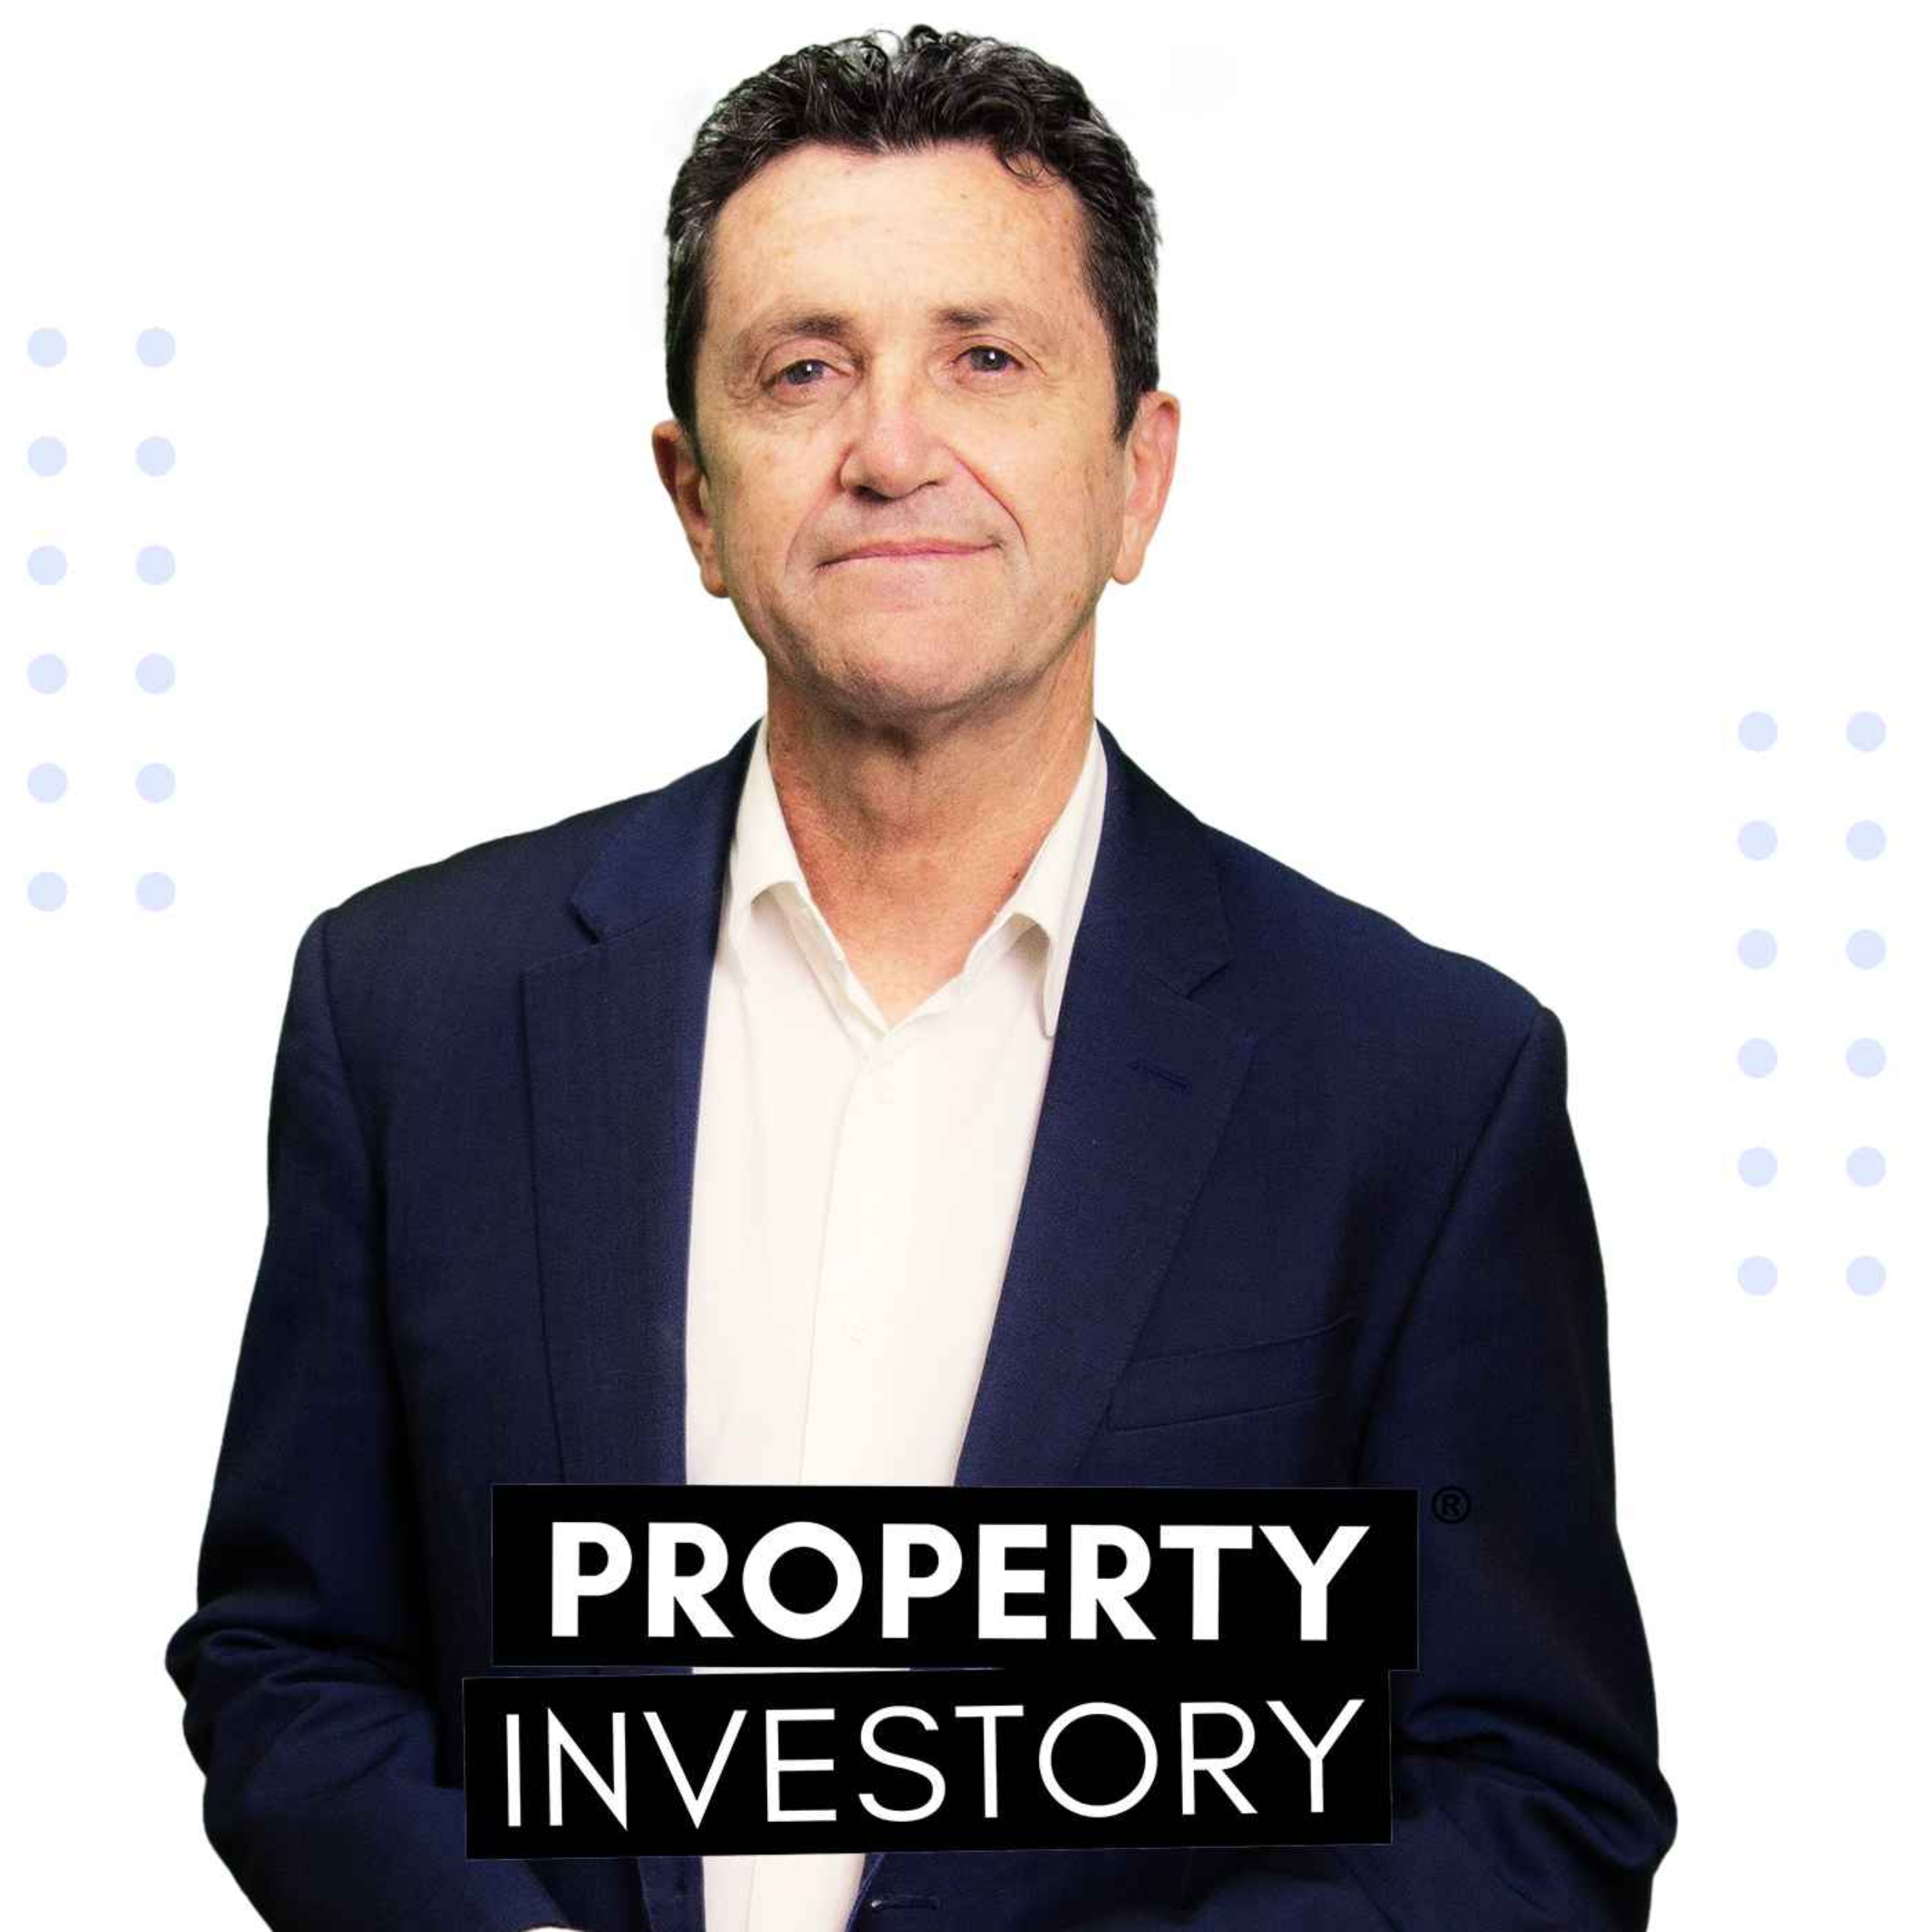 Joe Rossi on Stories From Selling a $142K Property To Diving in Data